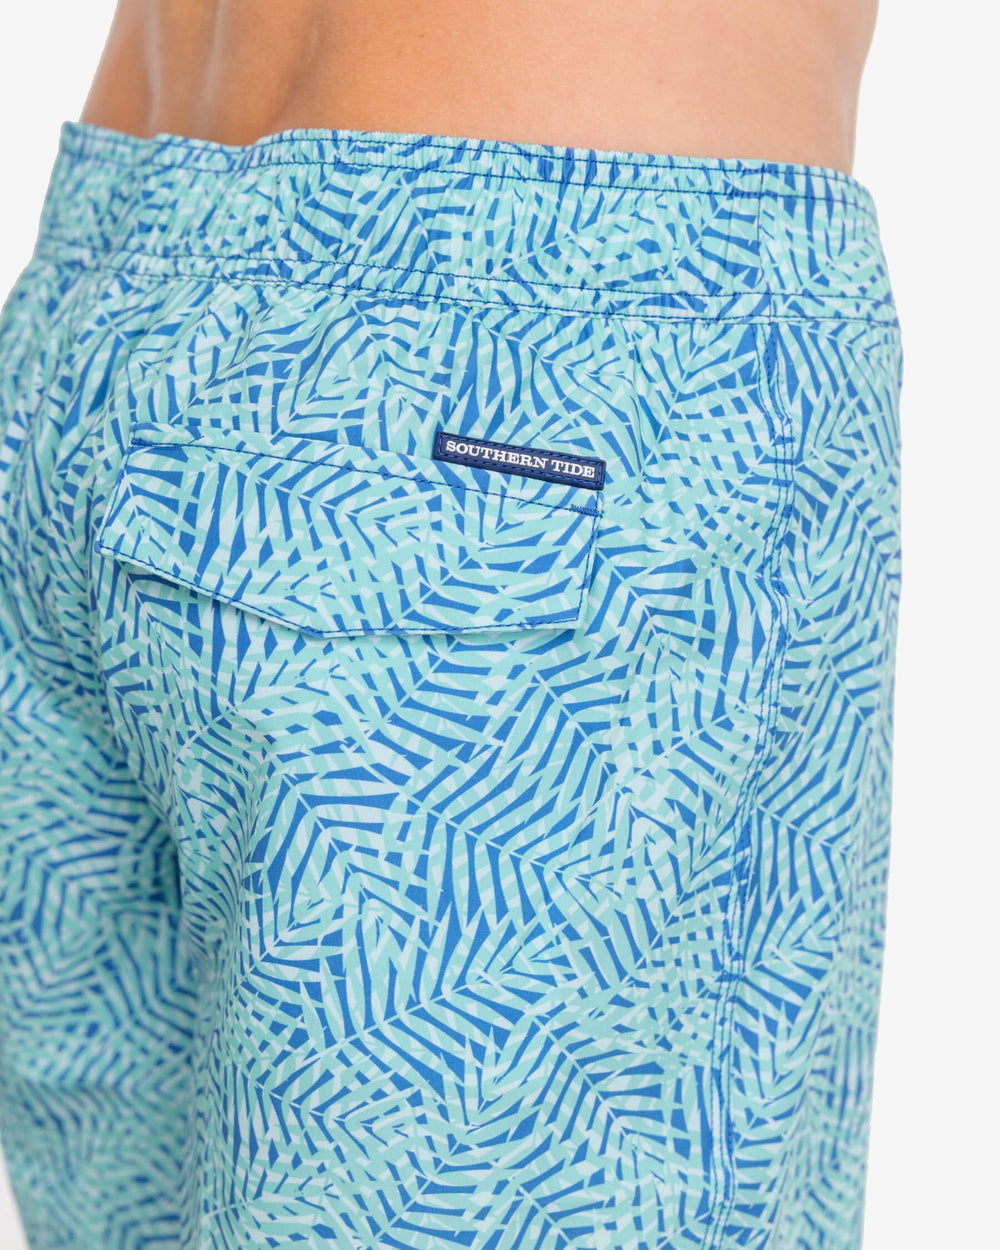 The detail view of the Southern Tide Vibin' Palm Printed Swim Short by Southern Tide - Atlantic Blue